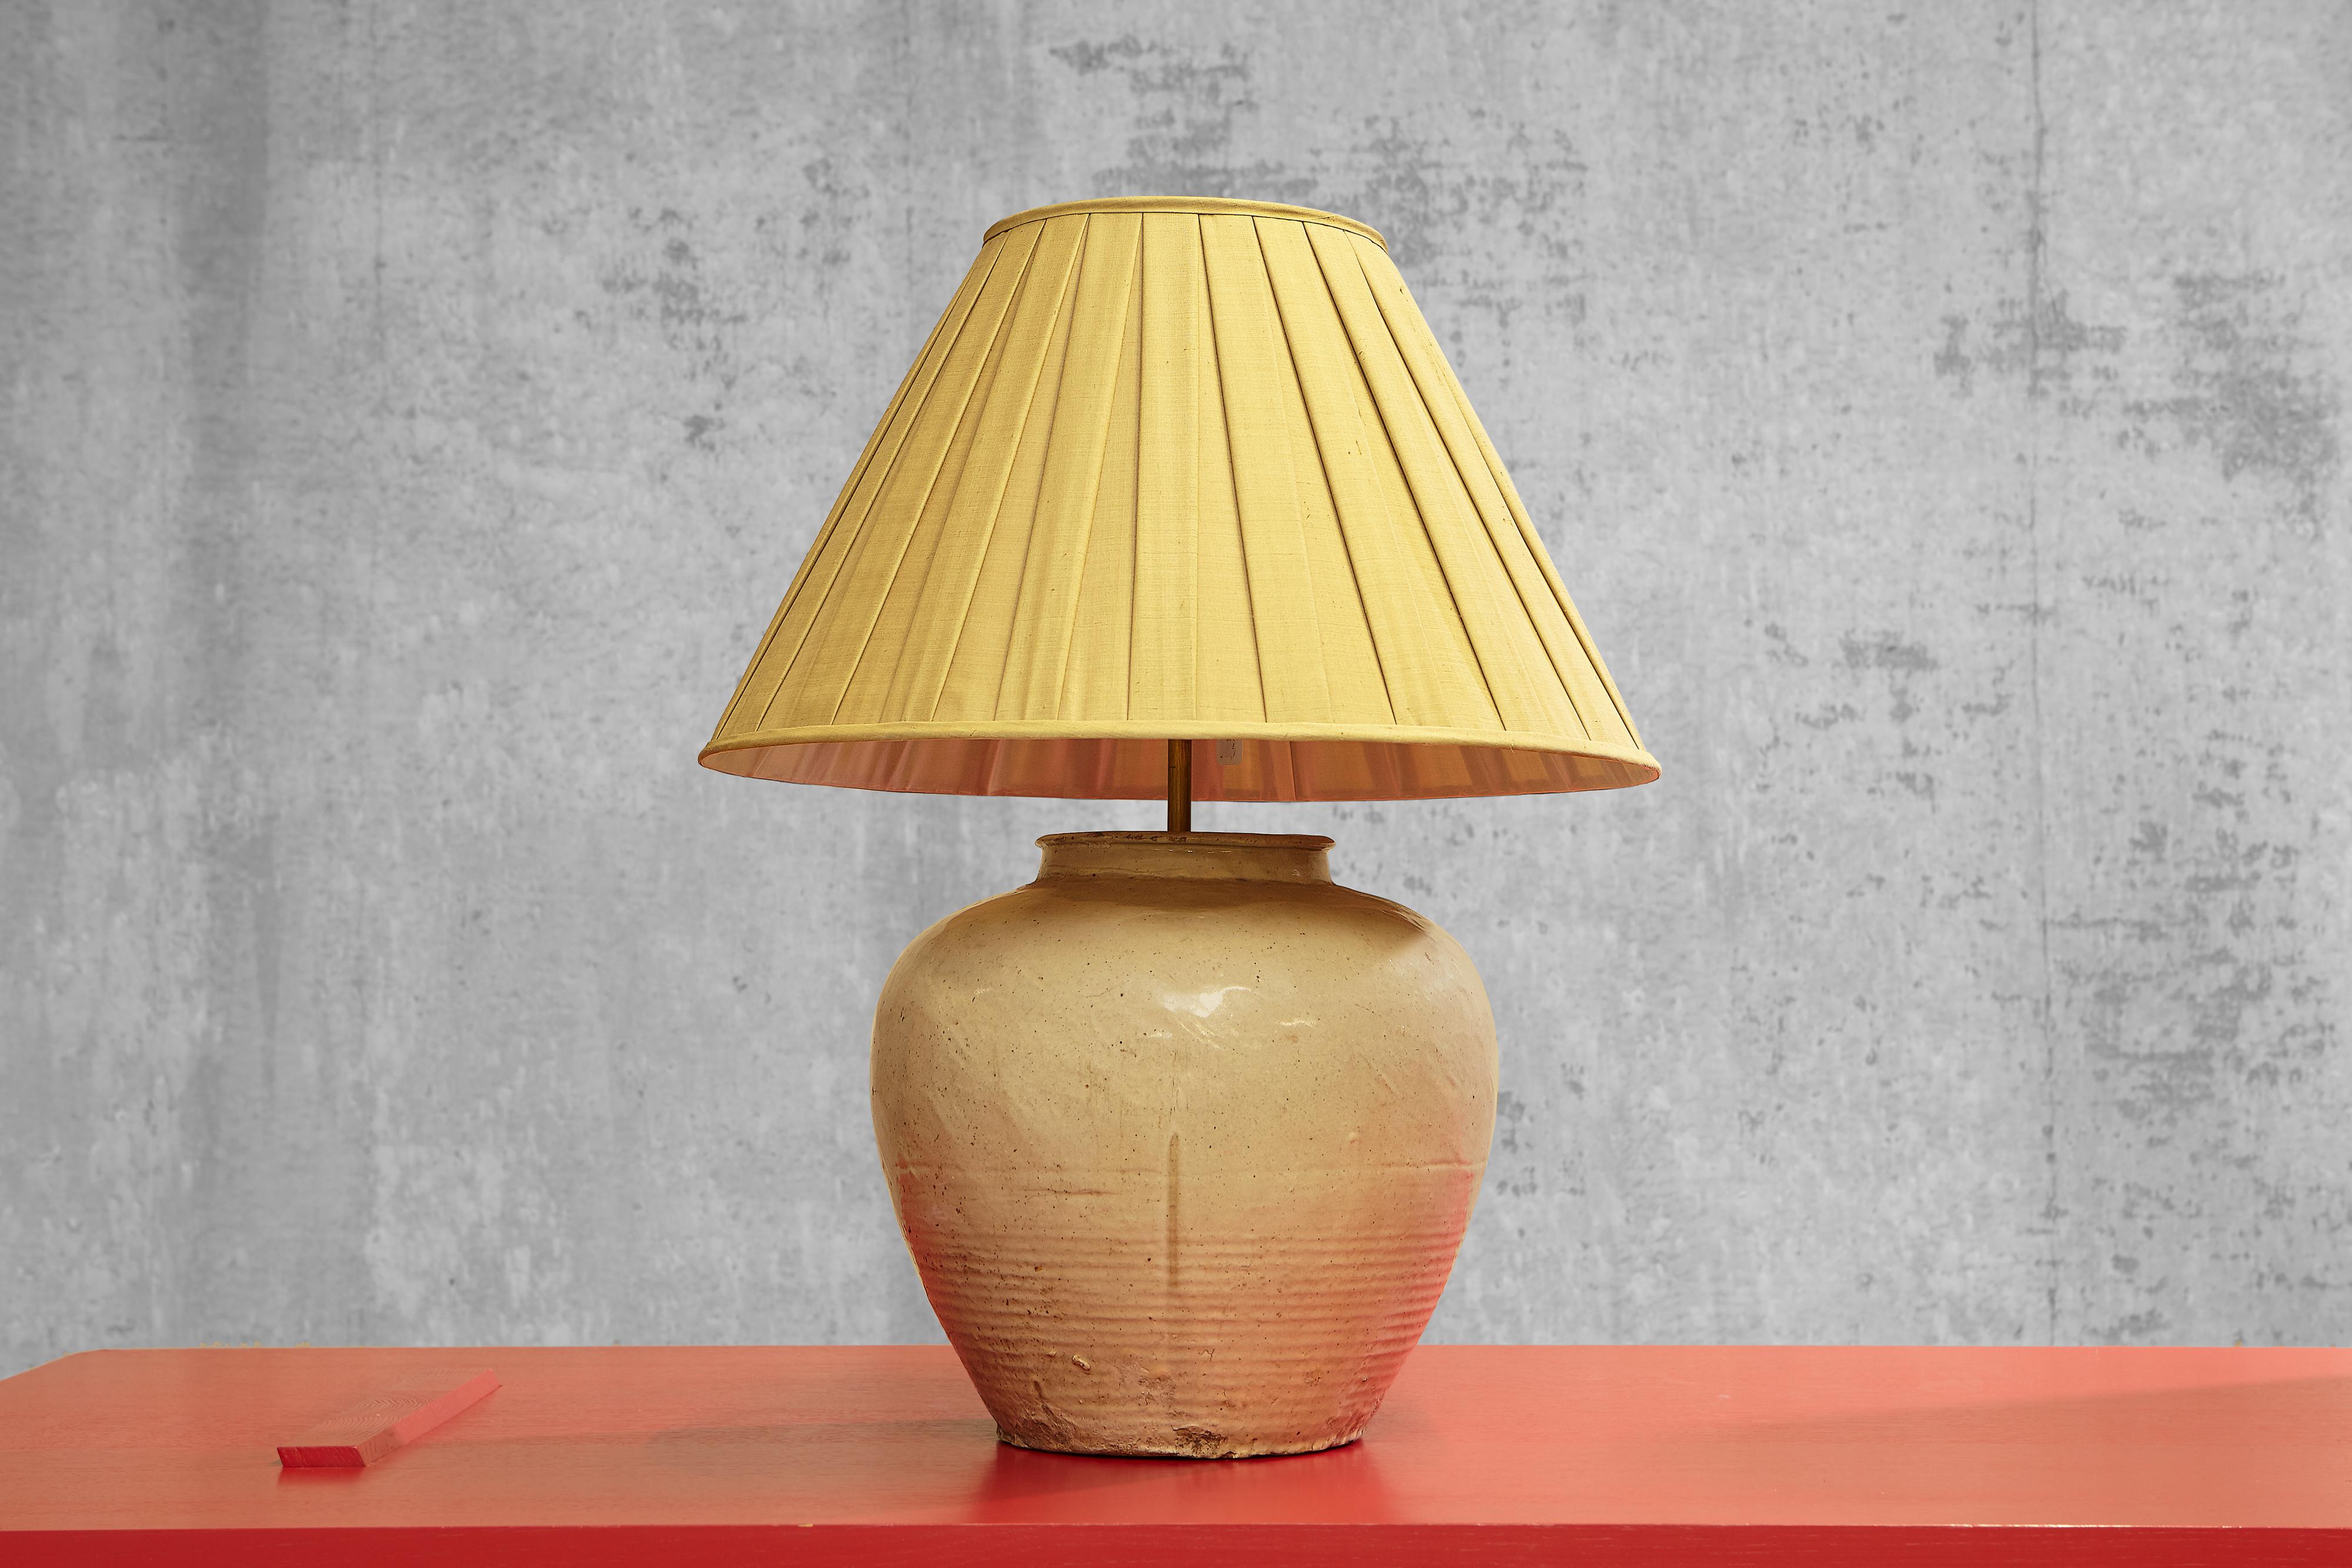 This beautiful table lamp is made of Chinese glazed pottery and has a light-grey and sand-colored tone. The round shaped glazed pottery lamp is a simple yet stylish eyecatcher. Glazed pottery is a fine but hard material that gives the interior a